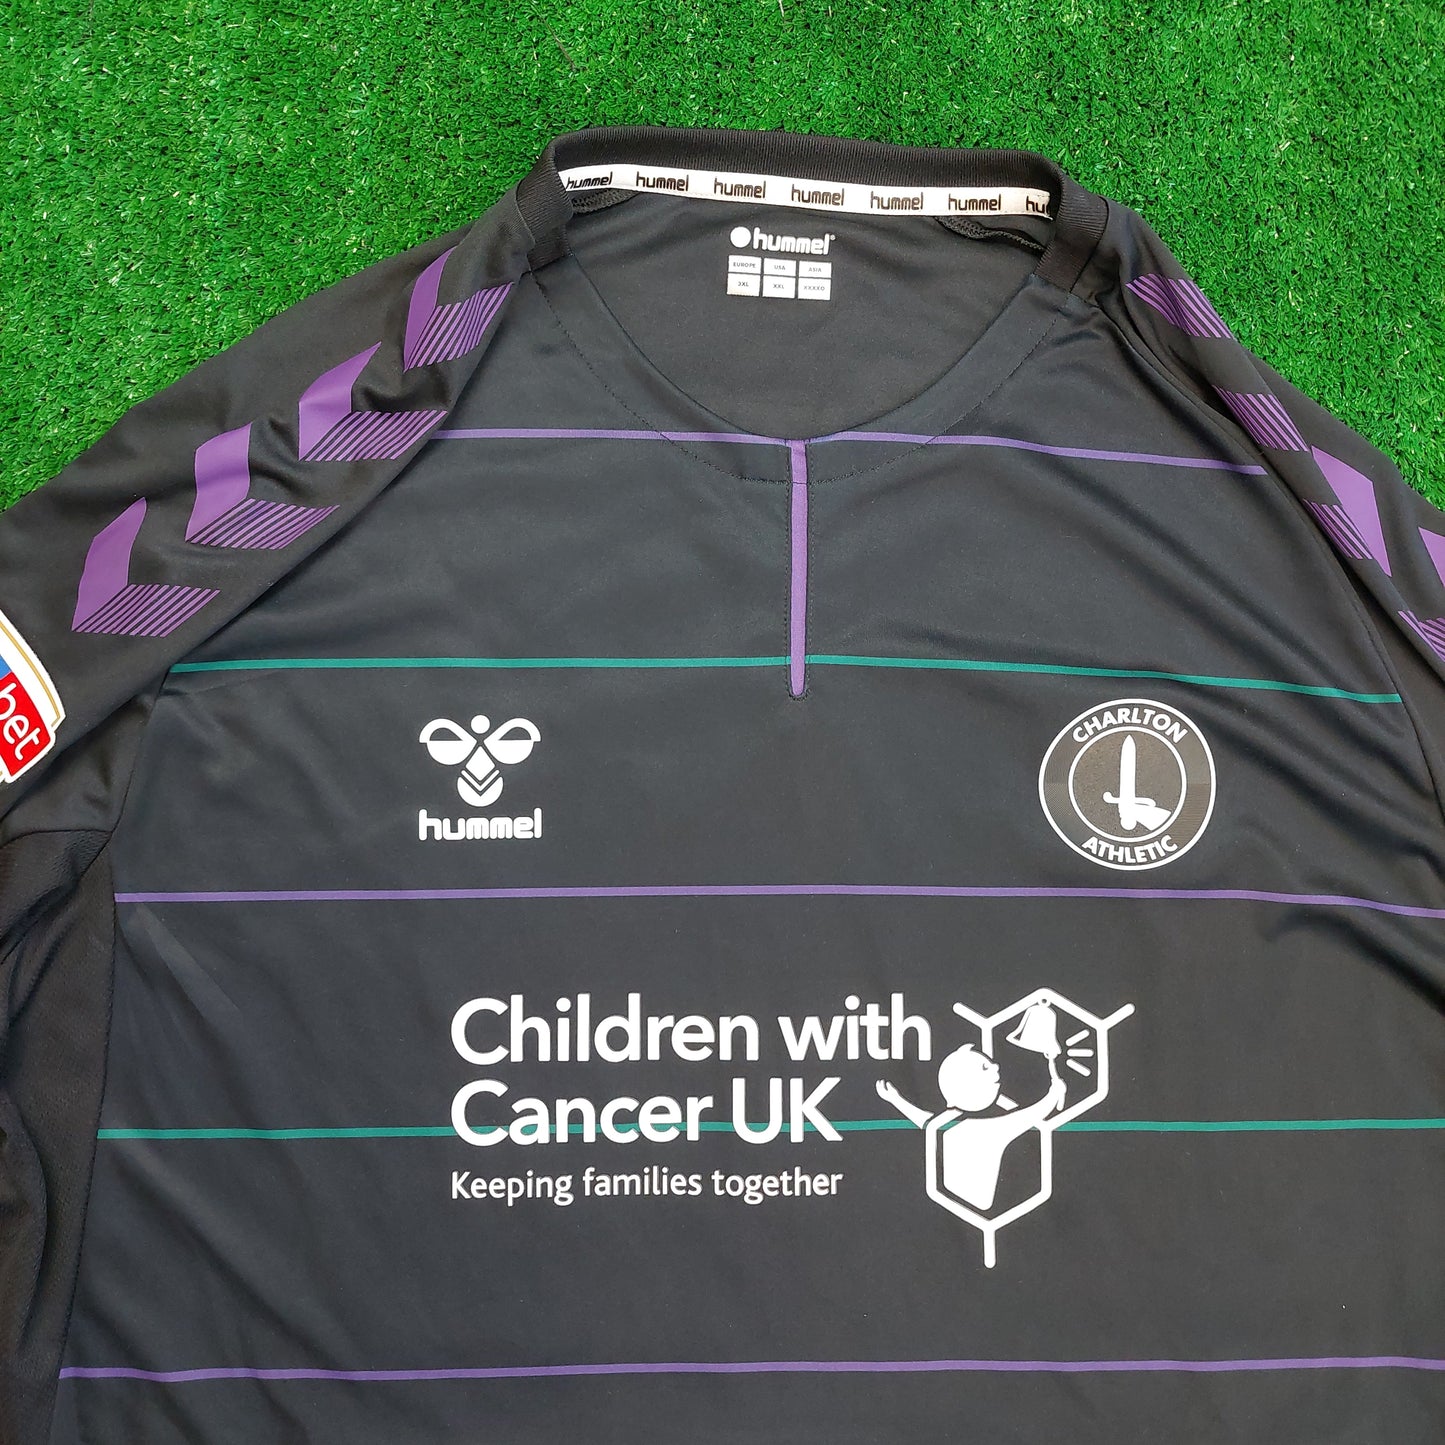 Charlton Athletic 2019/20 Away Shirt (Excellent) - Size 3XL